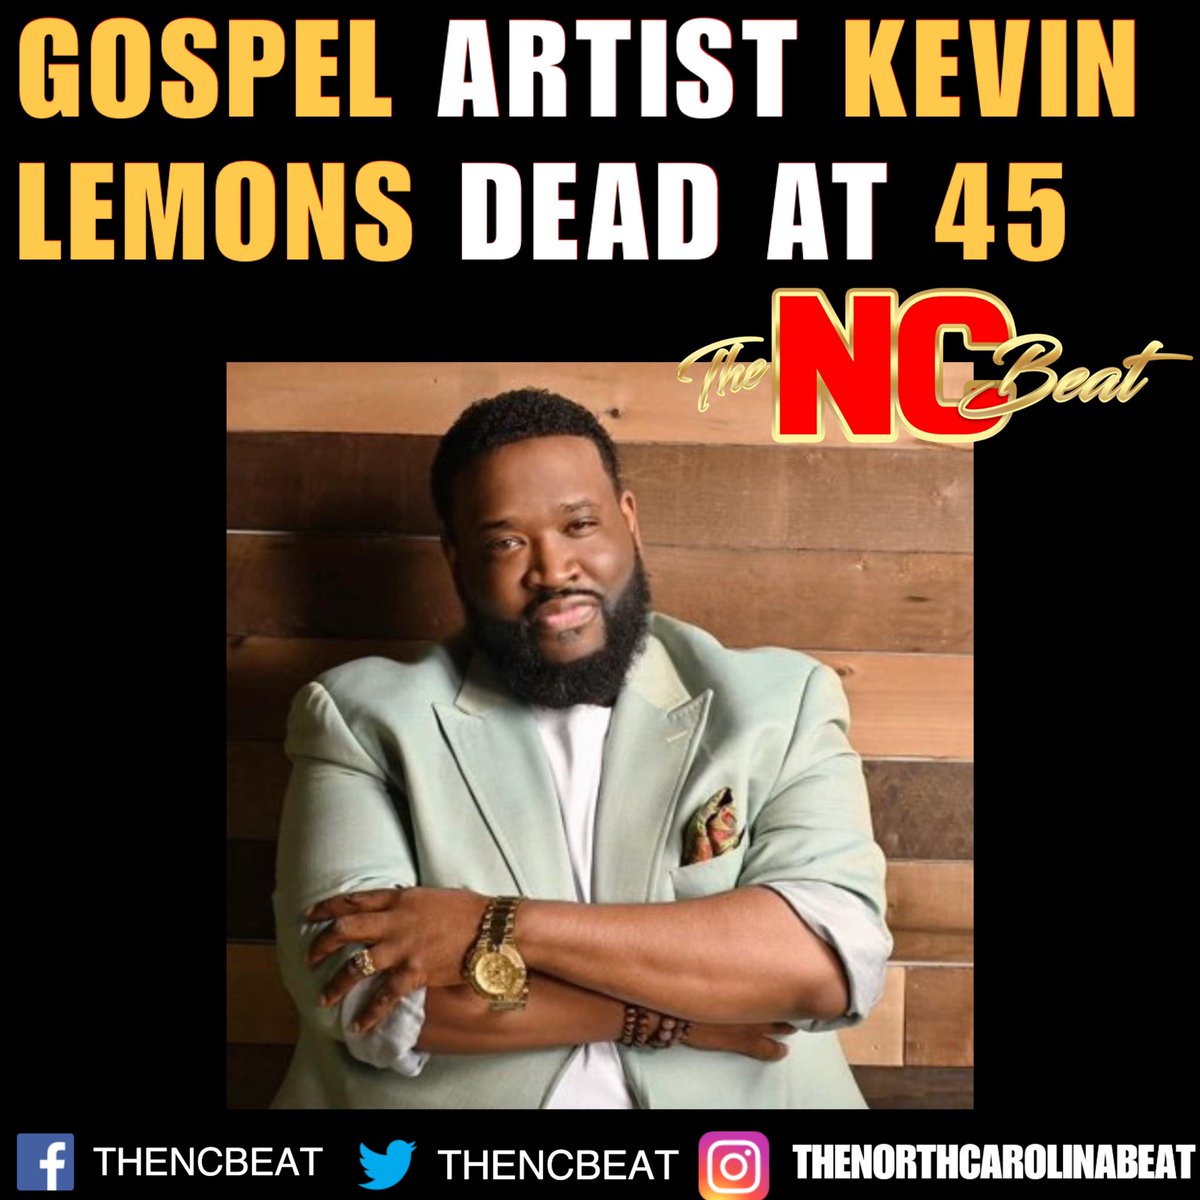 It is being reported out of #Atlanta that 45-year-old Gospel Artist Kevin Lemons has died of a heart attack. 

Lemons and his 103-member choir, Higher Calling, sang at #PorshaWilliams and #SimonGuobadia's wedding in November 2022.